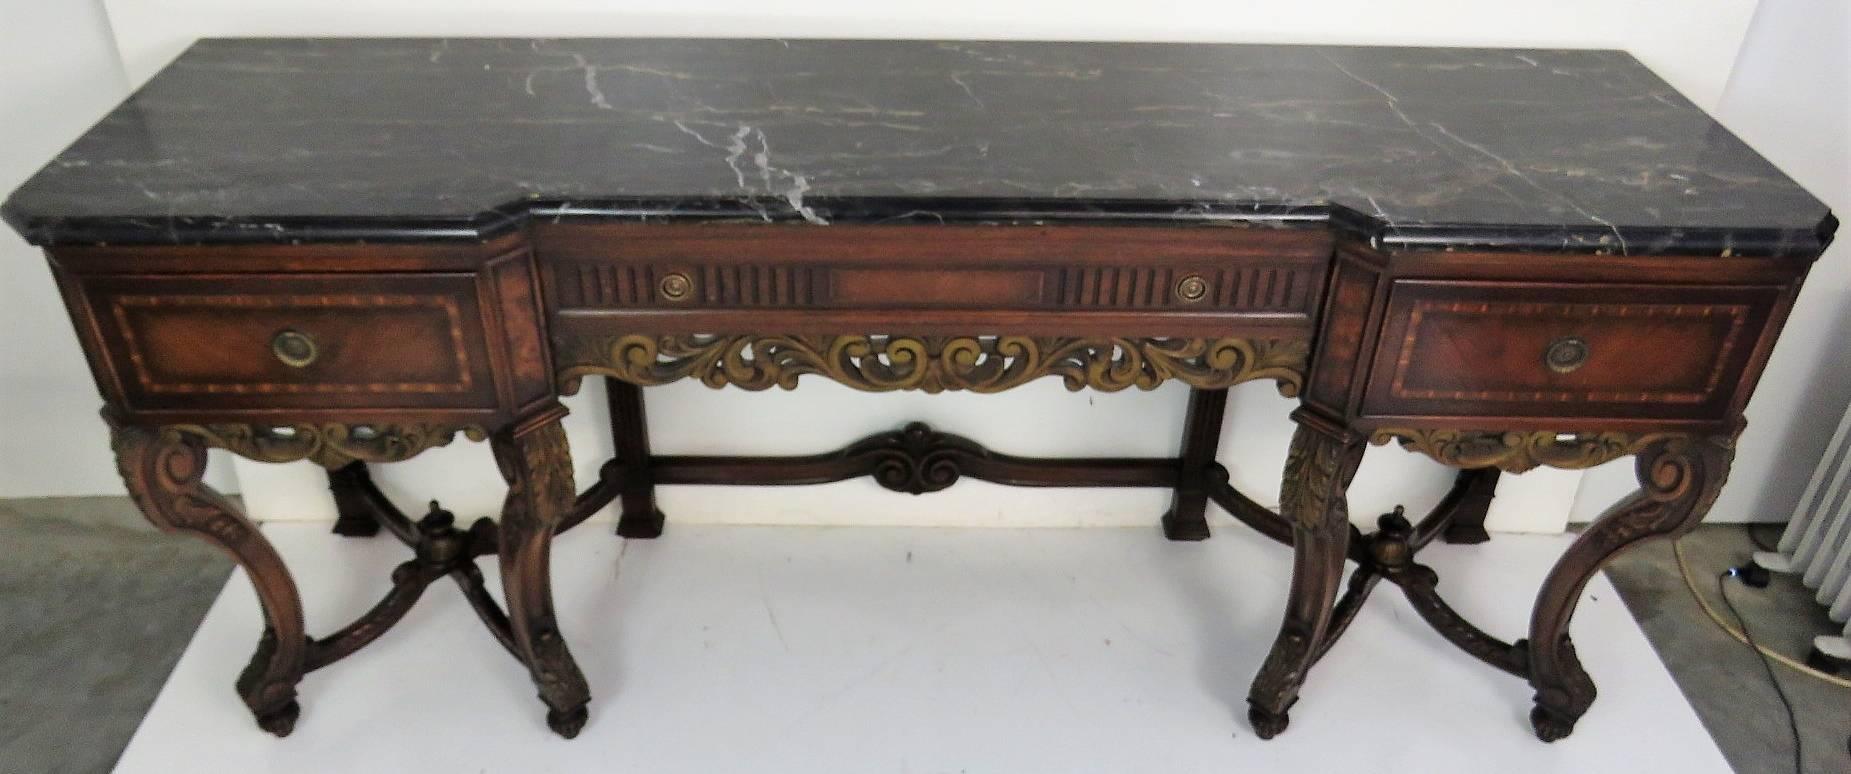 Marble-top. Gilt highlights. Inlaid drawers.